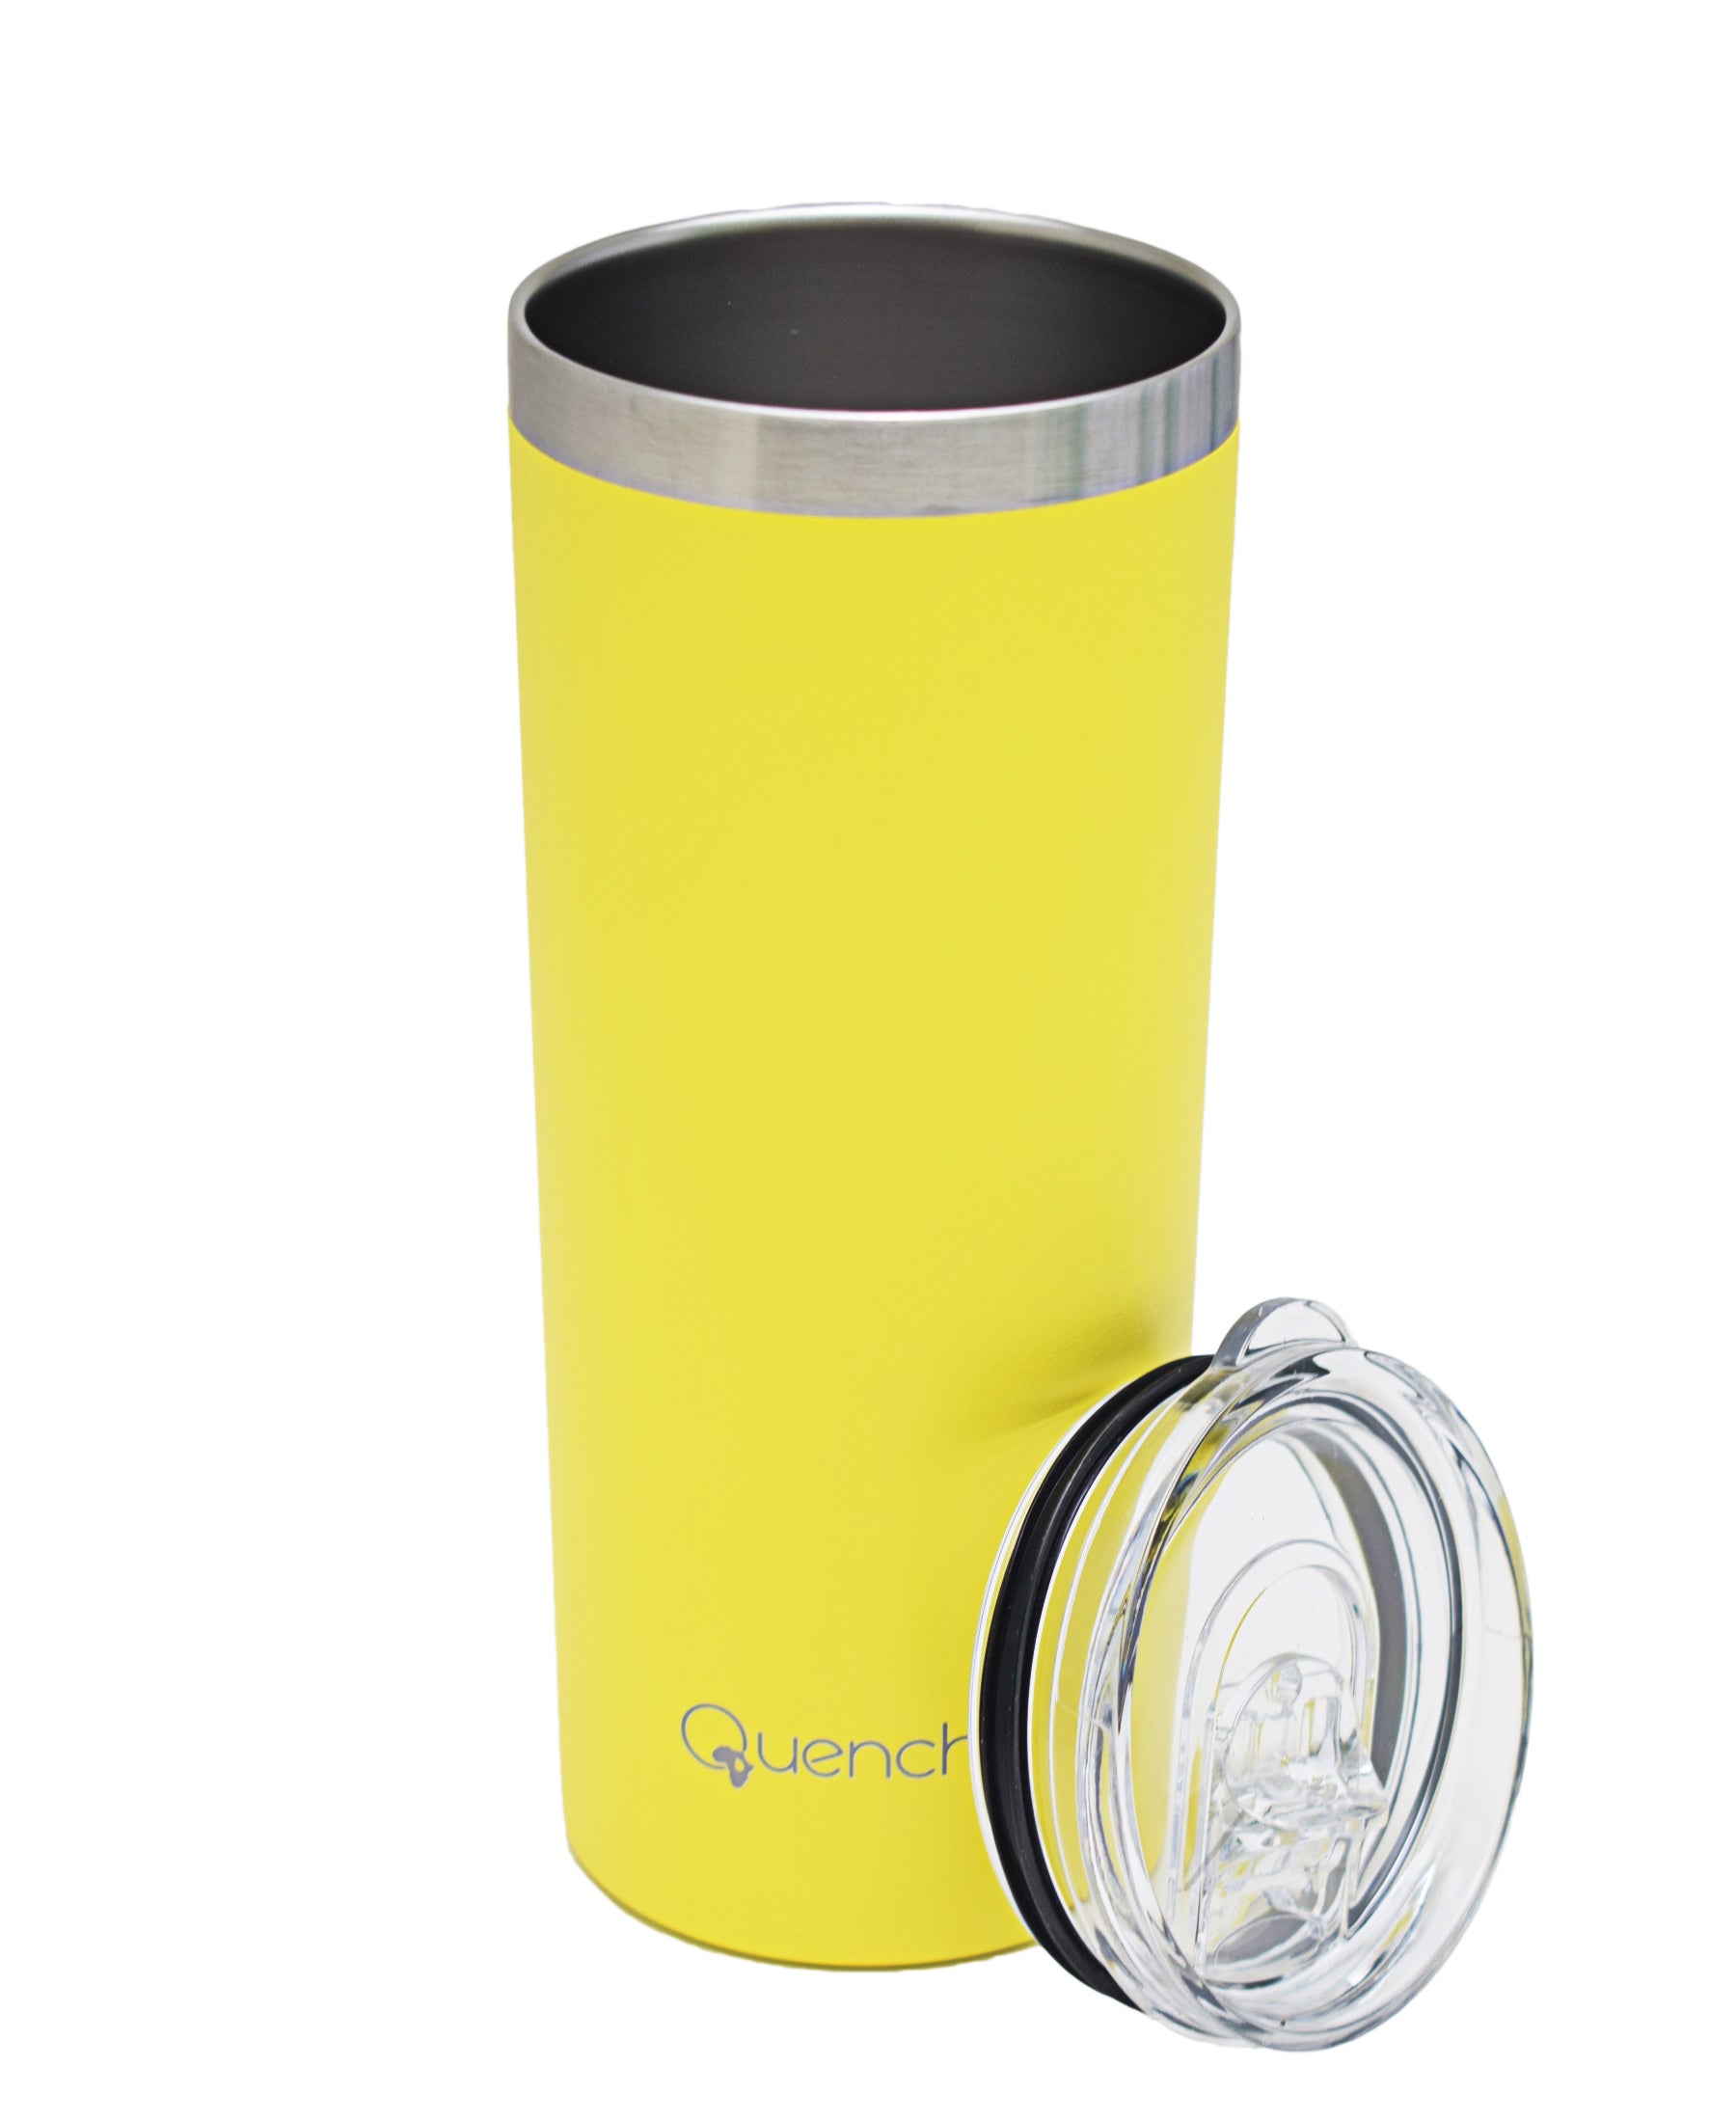 Quench 500ml Stainless Steel Travel Buddy - Sunshine Yellow